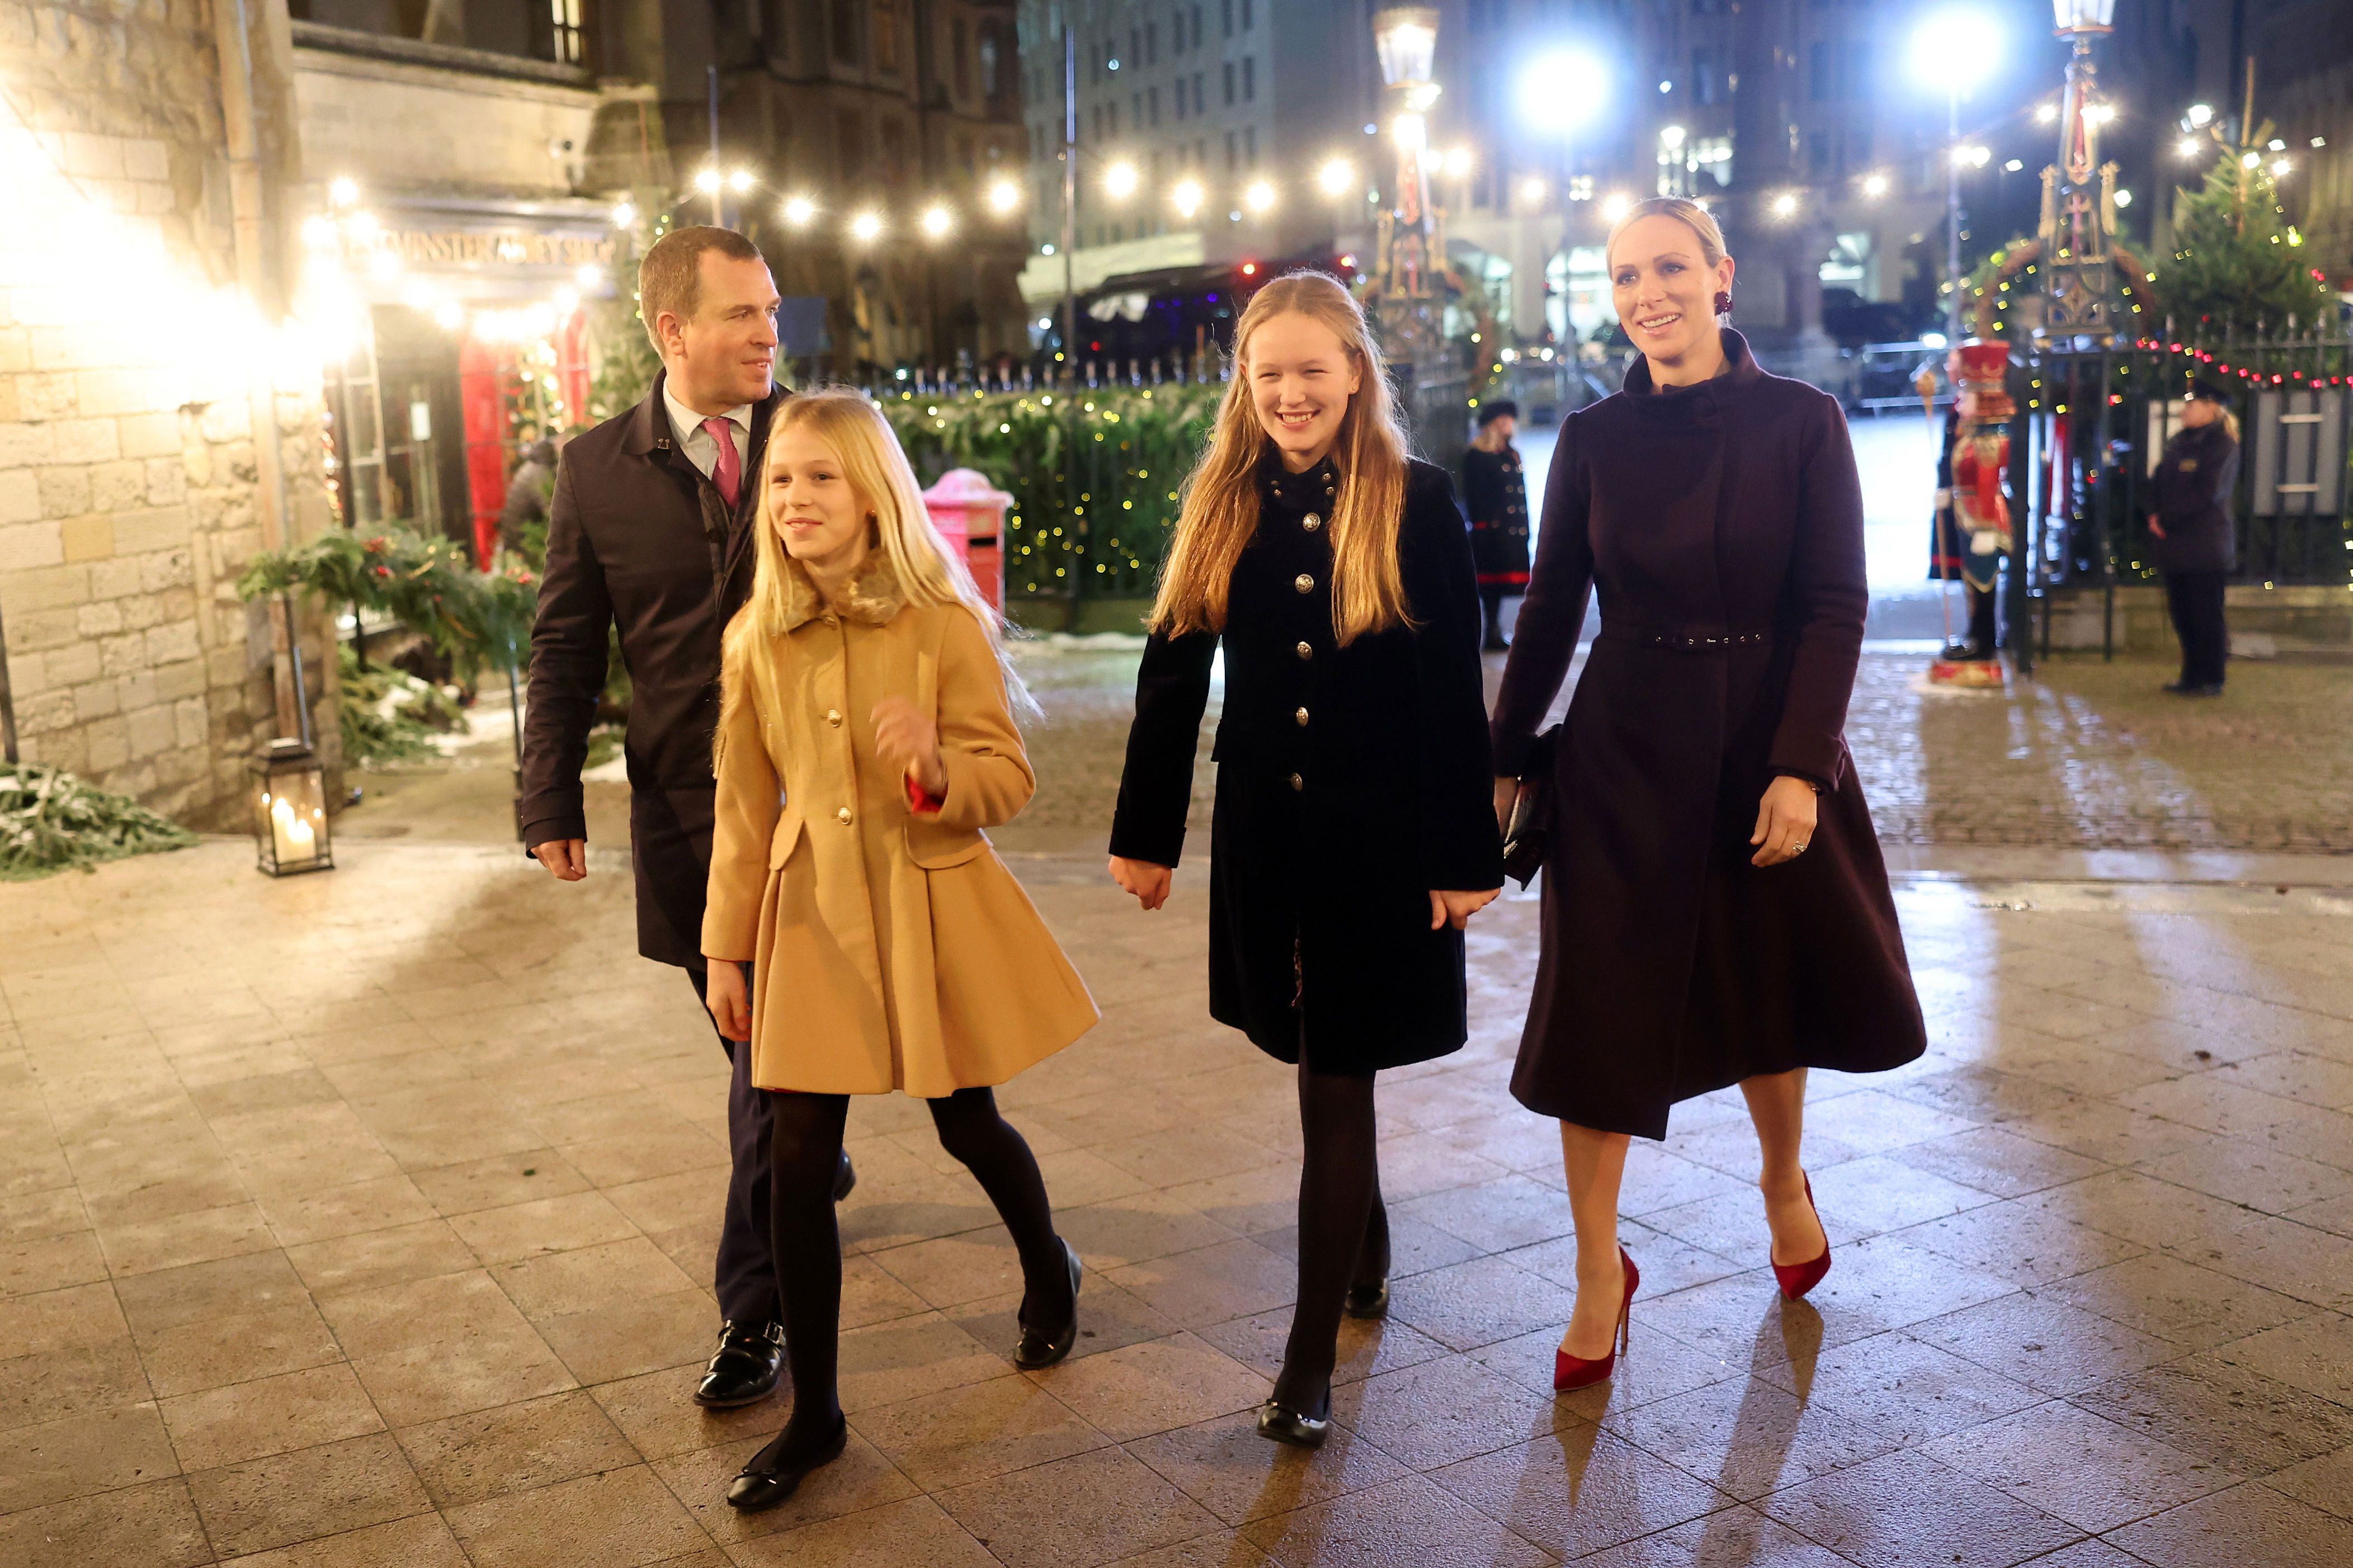 <p>Coming in right behind her father in the No. 19 spot in line for the crown is young Savannah Phillips (second from right), the great-granddaughter of Queen Elizabeth II, granddaughter of Princess Anne and daughter of Peter Phillips. </p><p>The 20th royal family member in line for the throne is Savannah's little sister, Isla Phillips (second from left). Their mother is Peter's ex-wife, Canada-born Autumn Kelly.</p><p>The girls are seen here with their father and aunt, Zara Tindall, who's next on the list...</p>